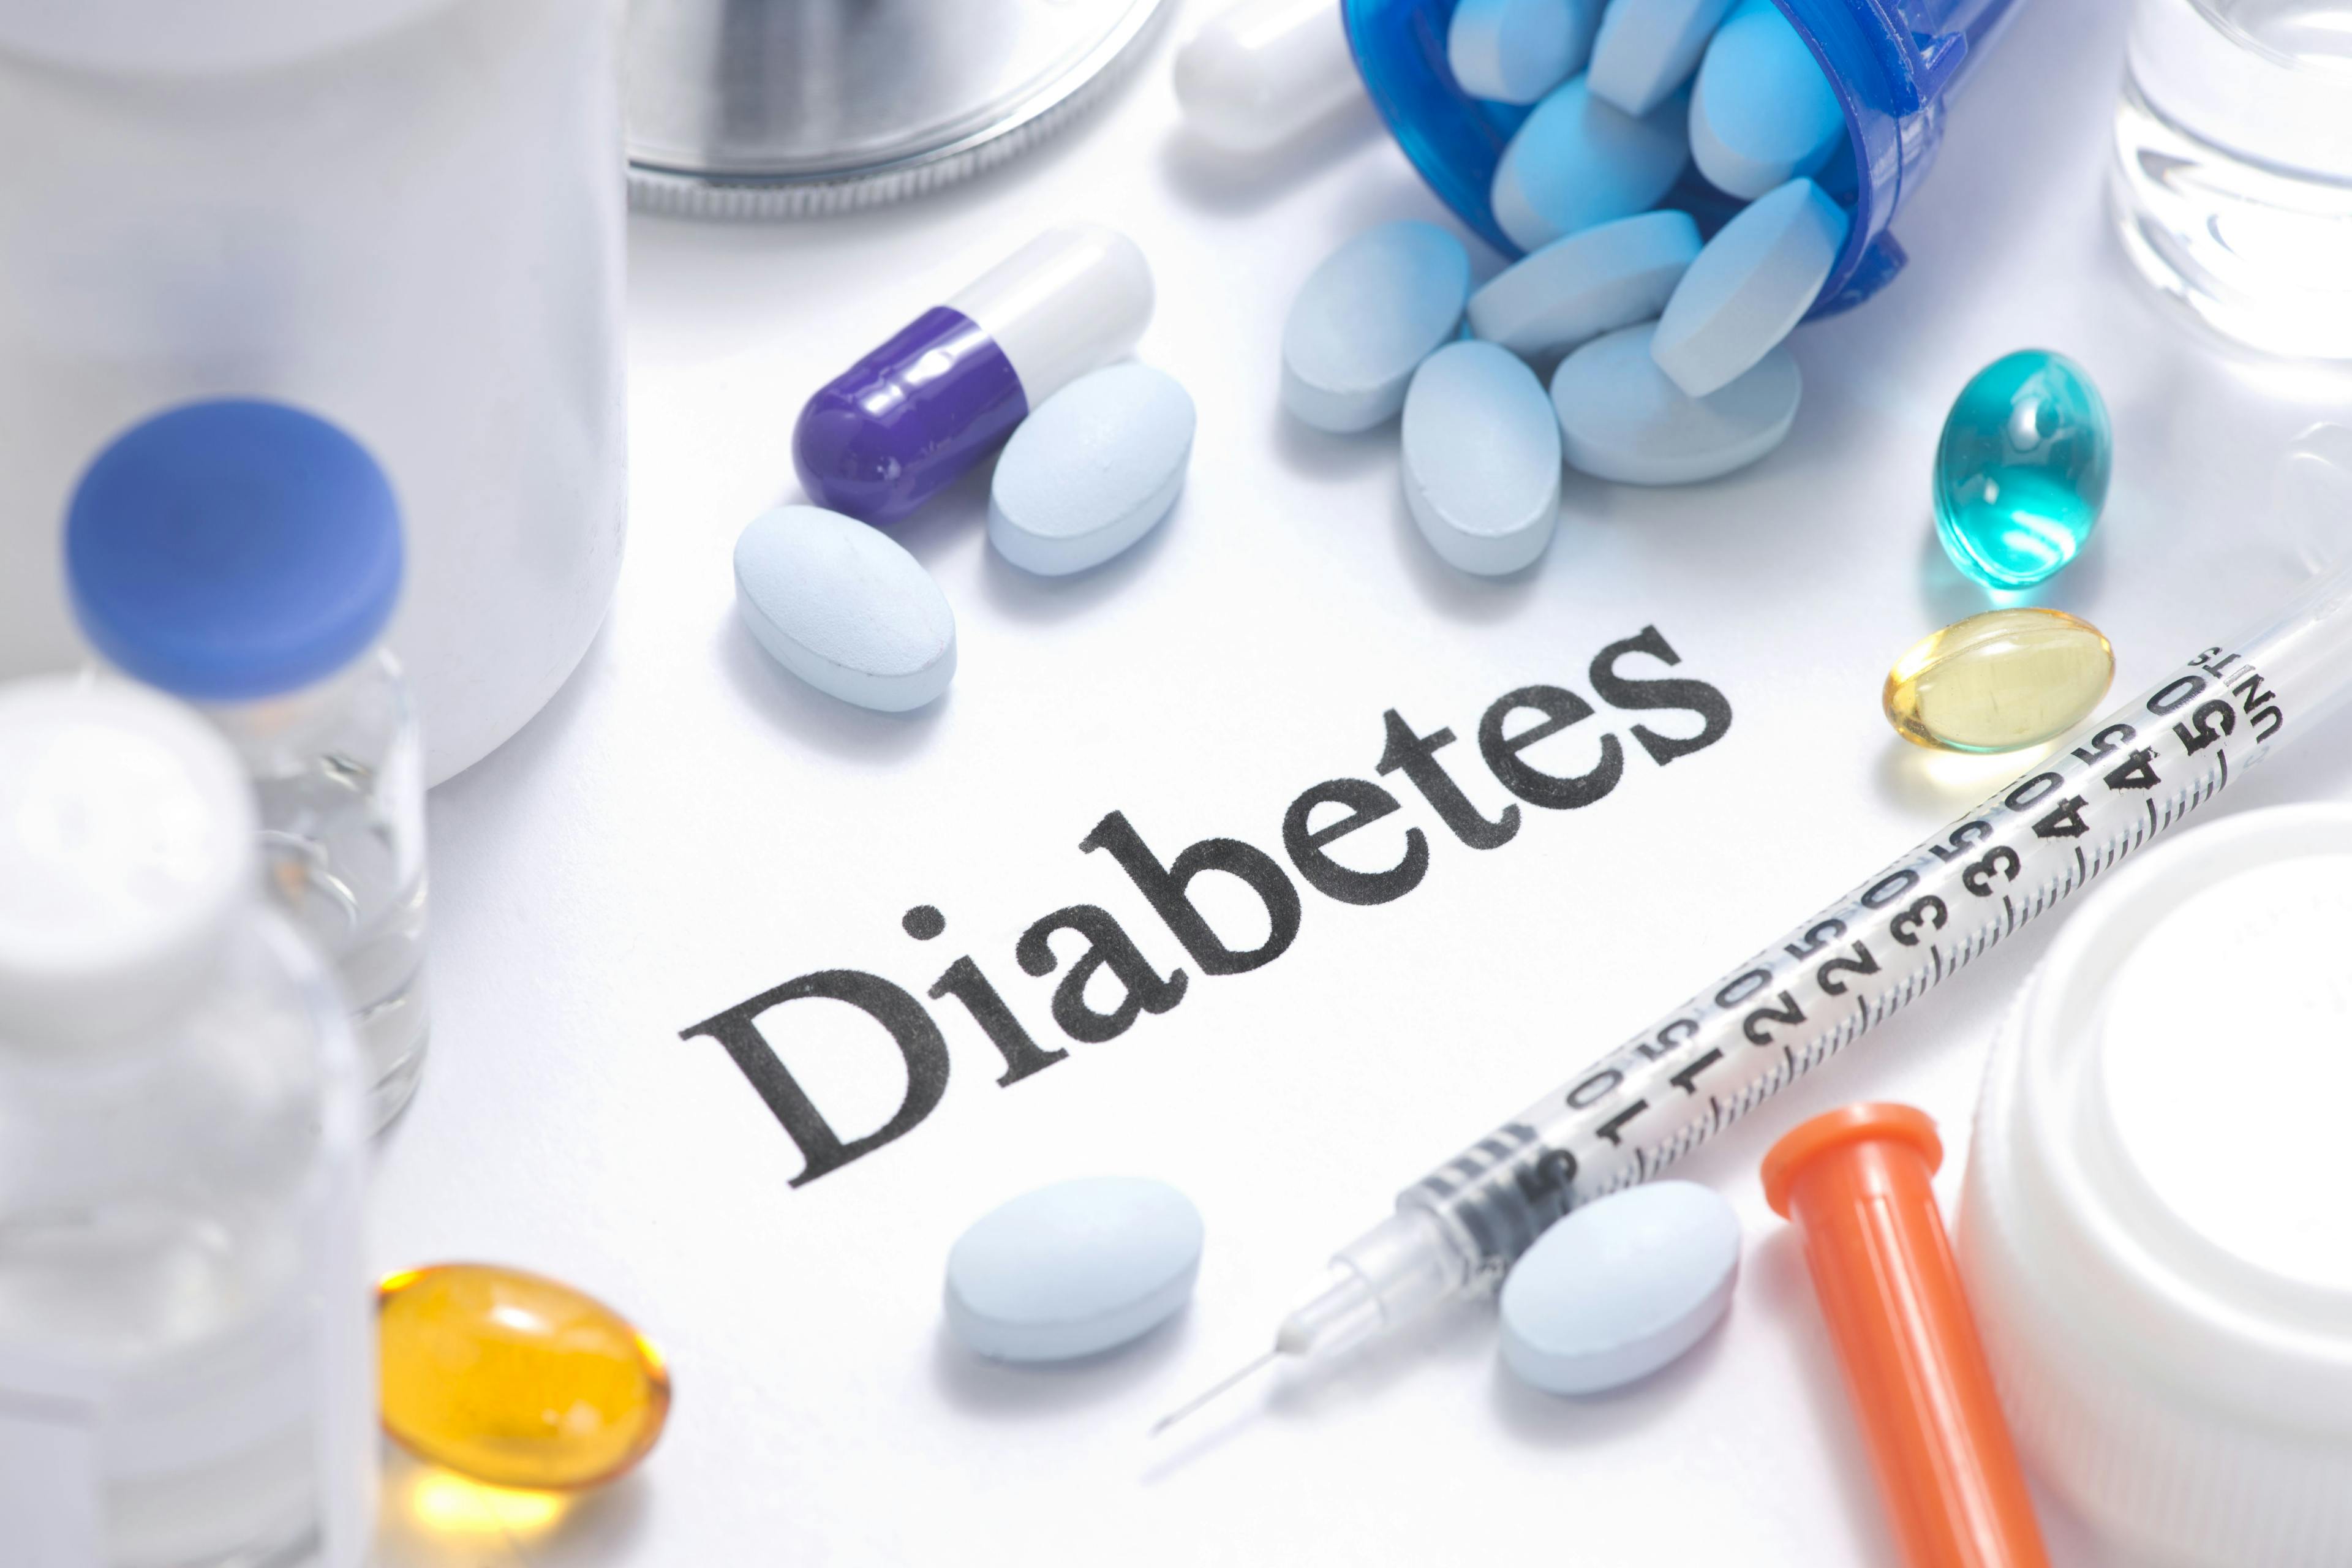 Diabetes-themed stock imagery, including syringes, insulin, and other medications. | Credit: Fotolia 